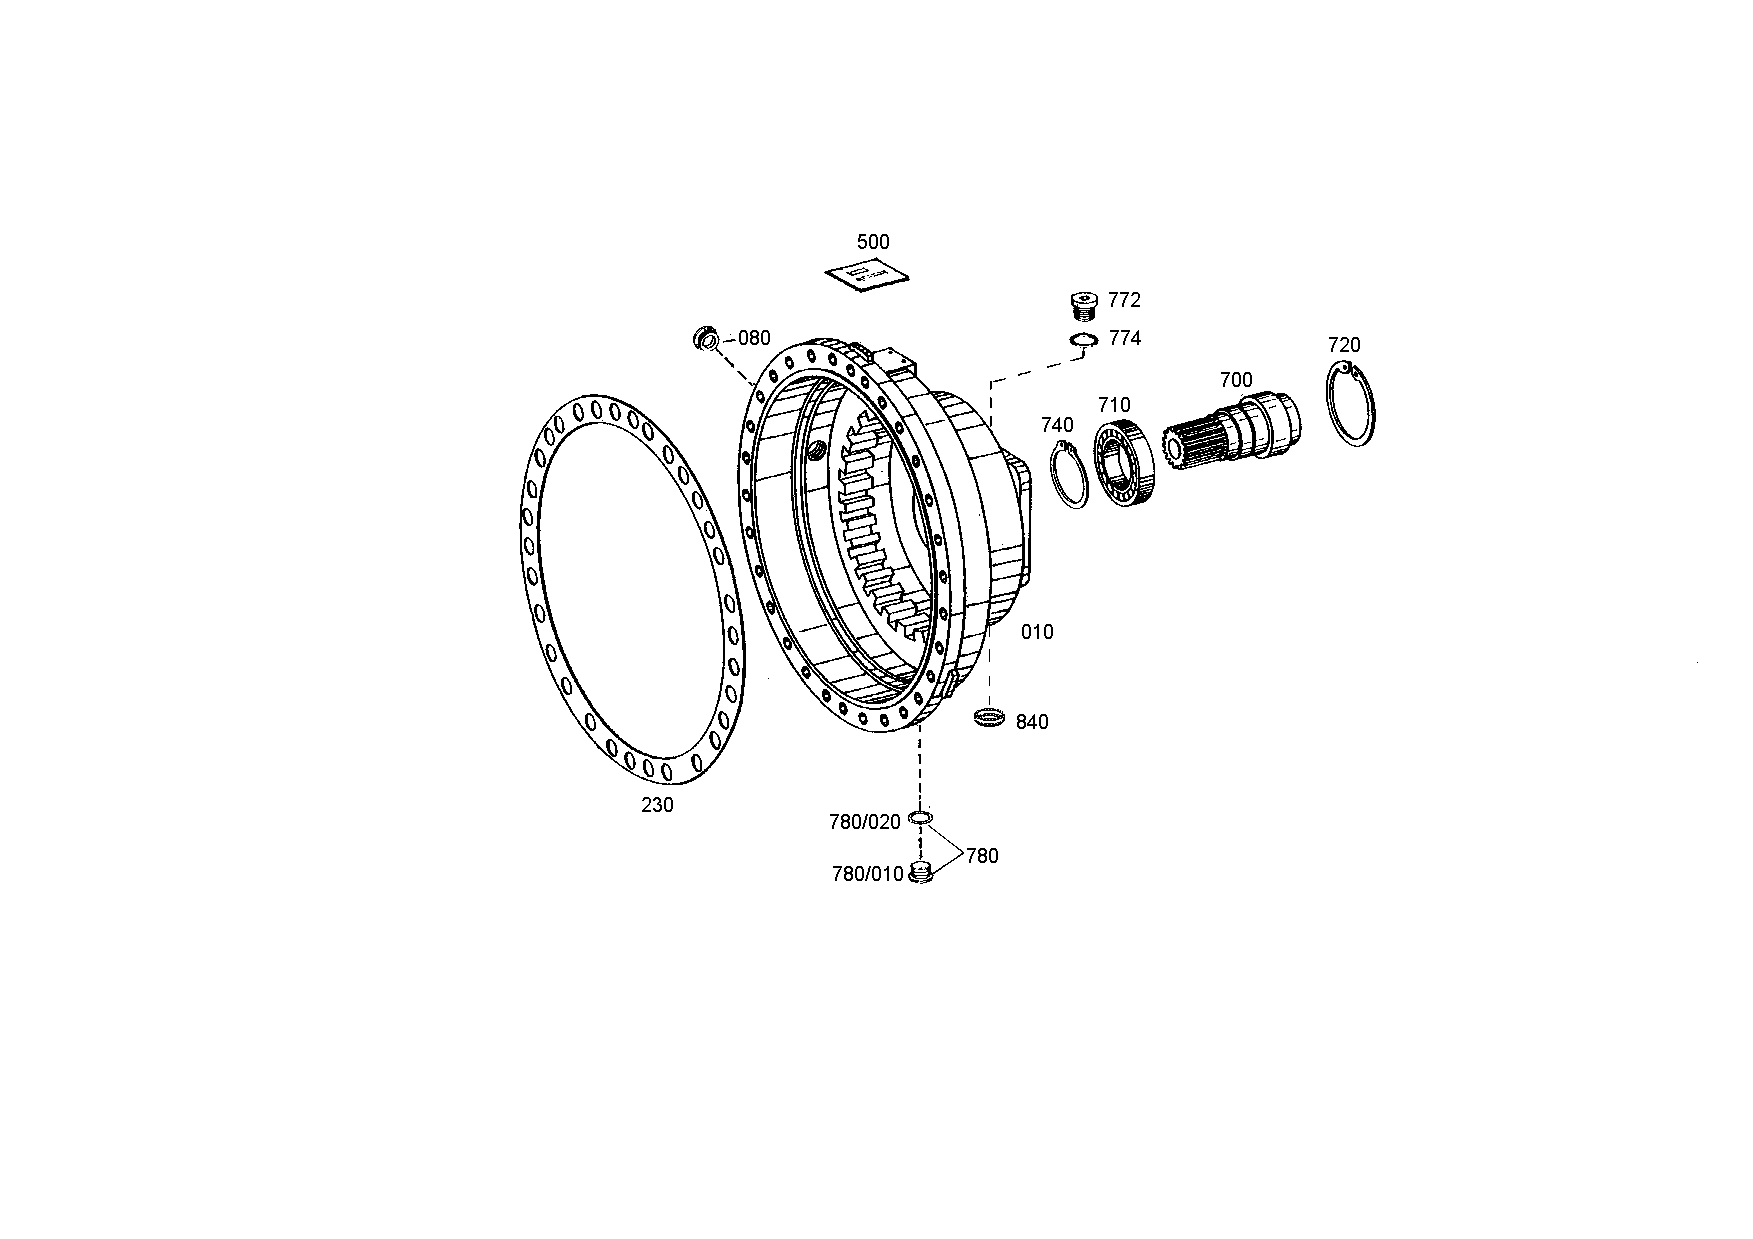 drawing for PPM 6049070 - O-RING (figure 2)